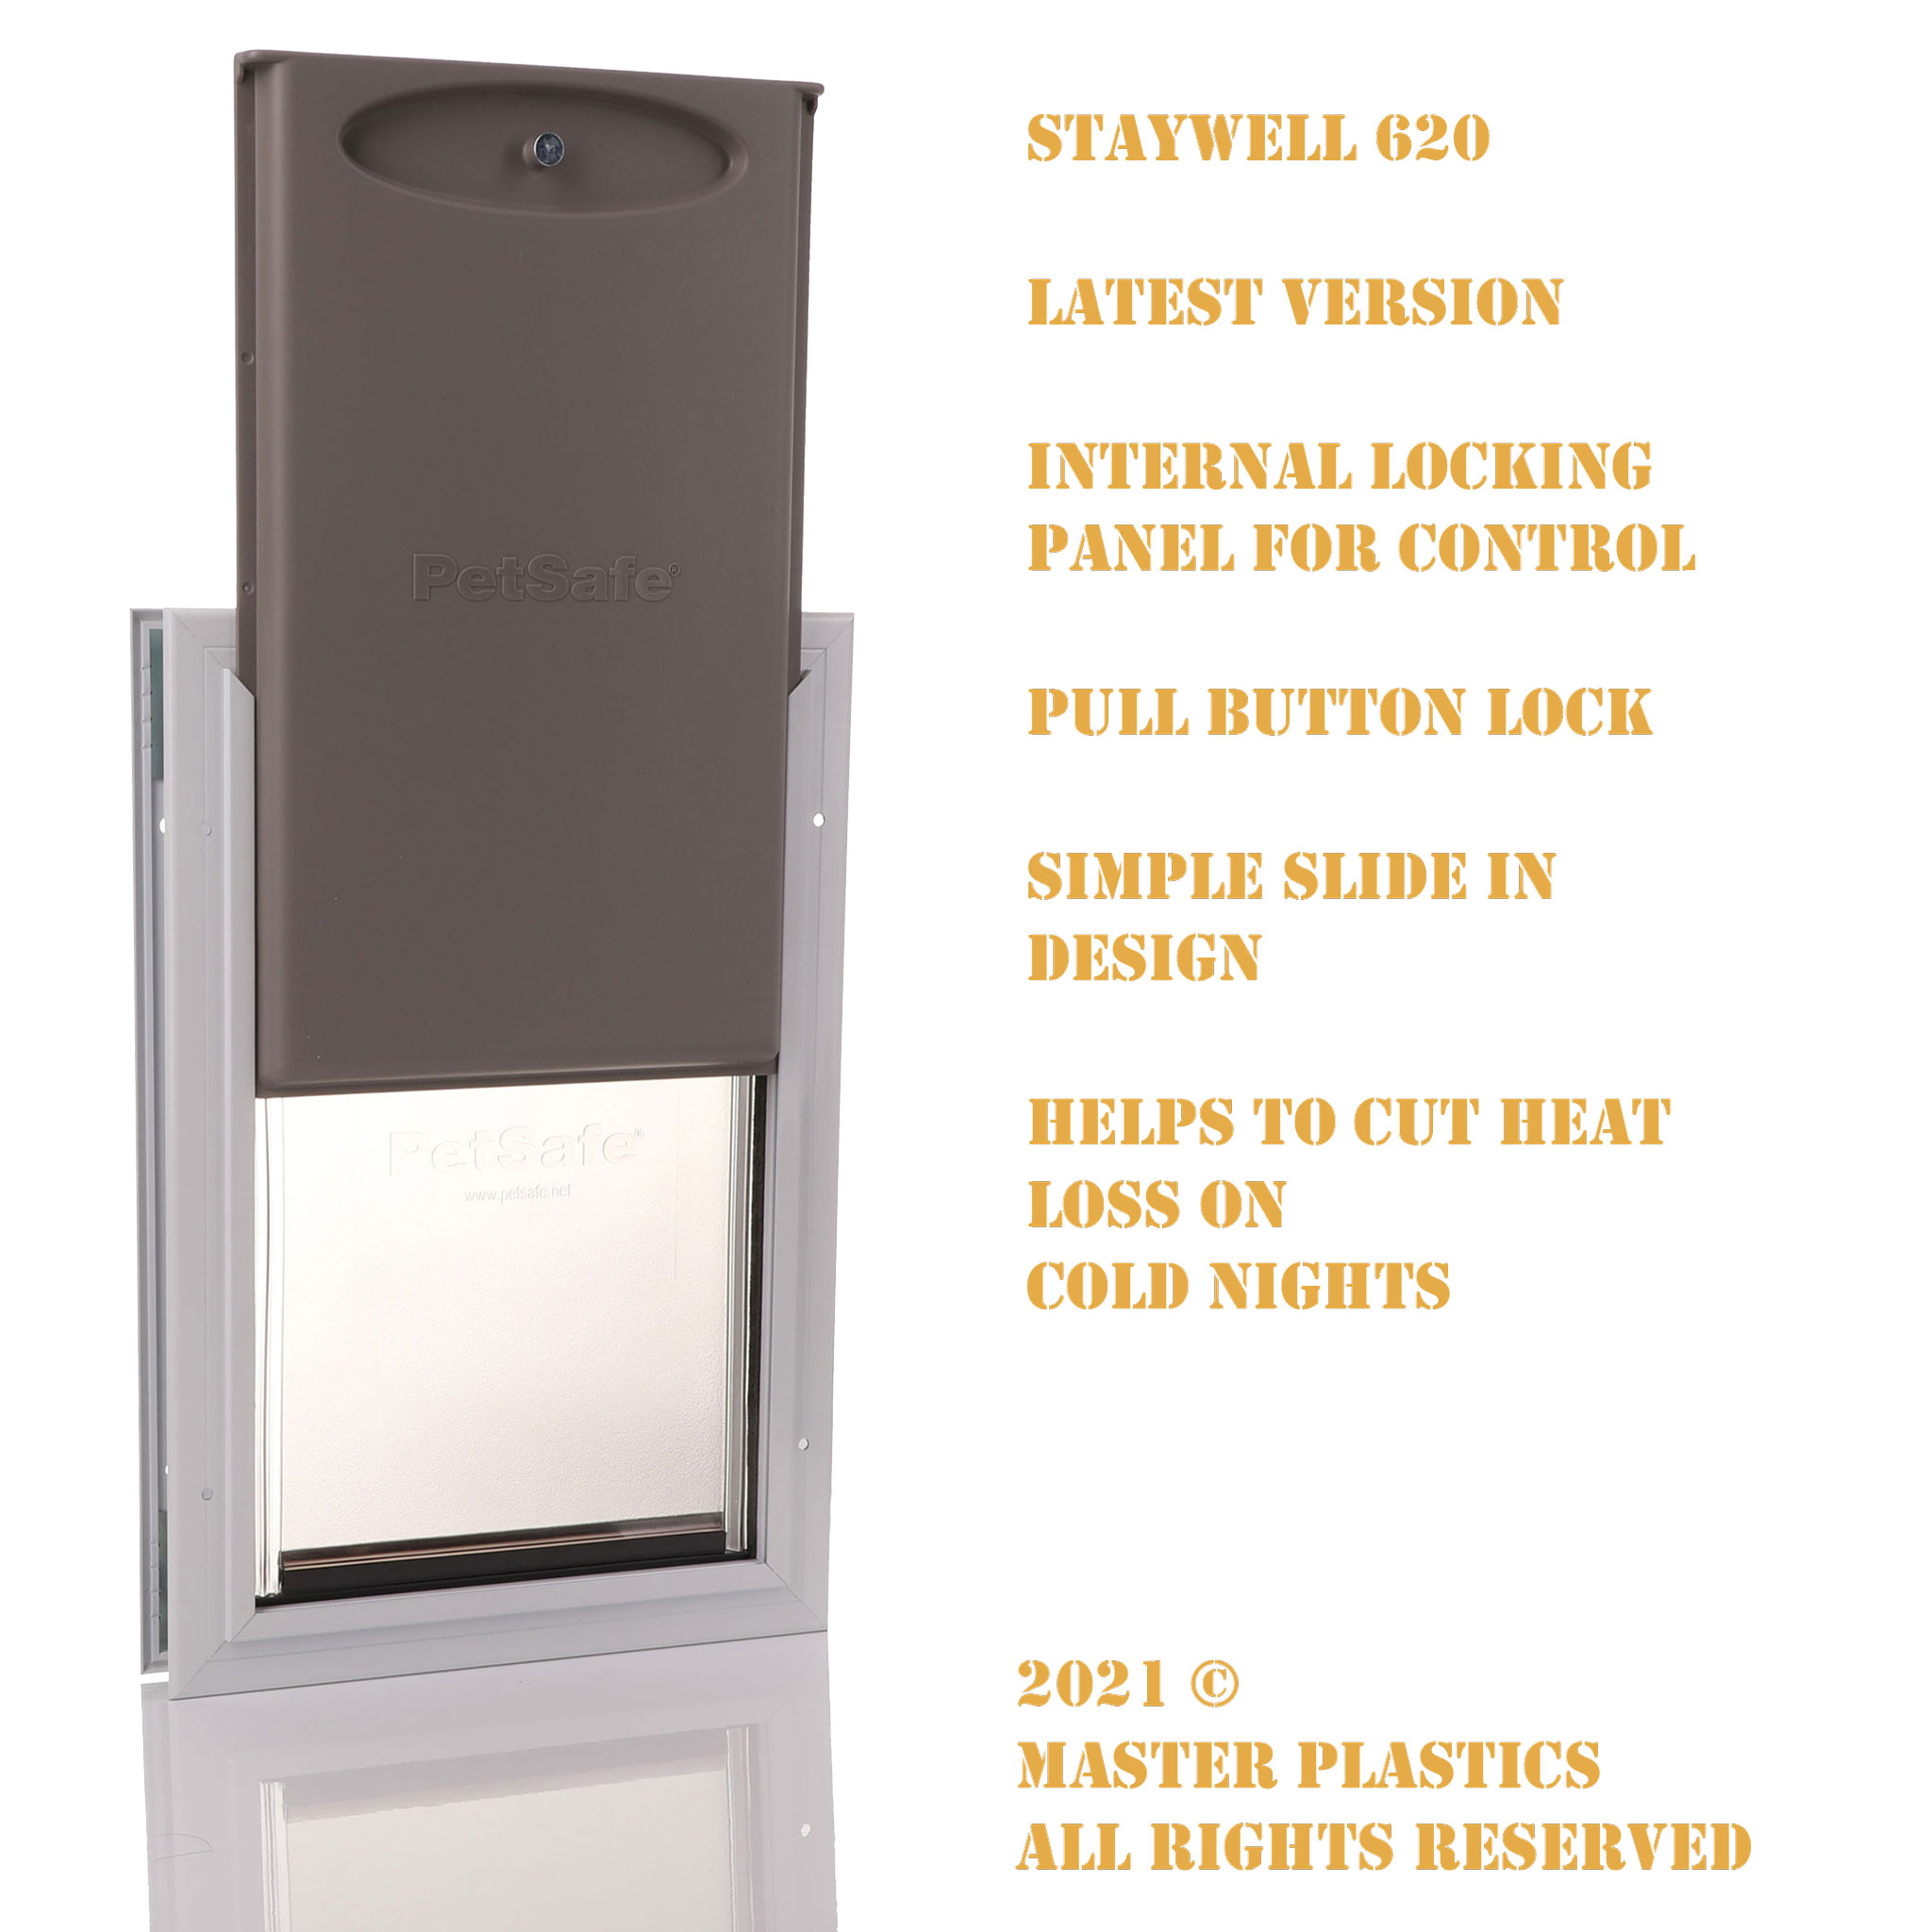 The picture shows a slide in manual panel which can be used to close the door.